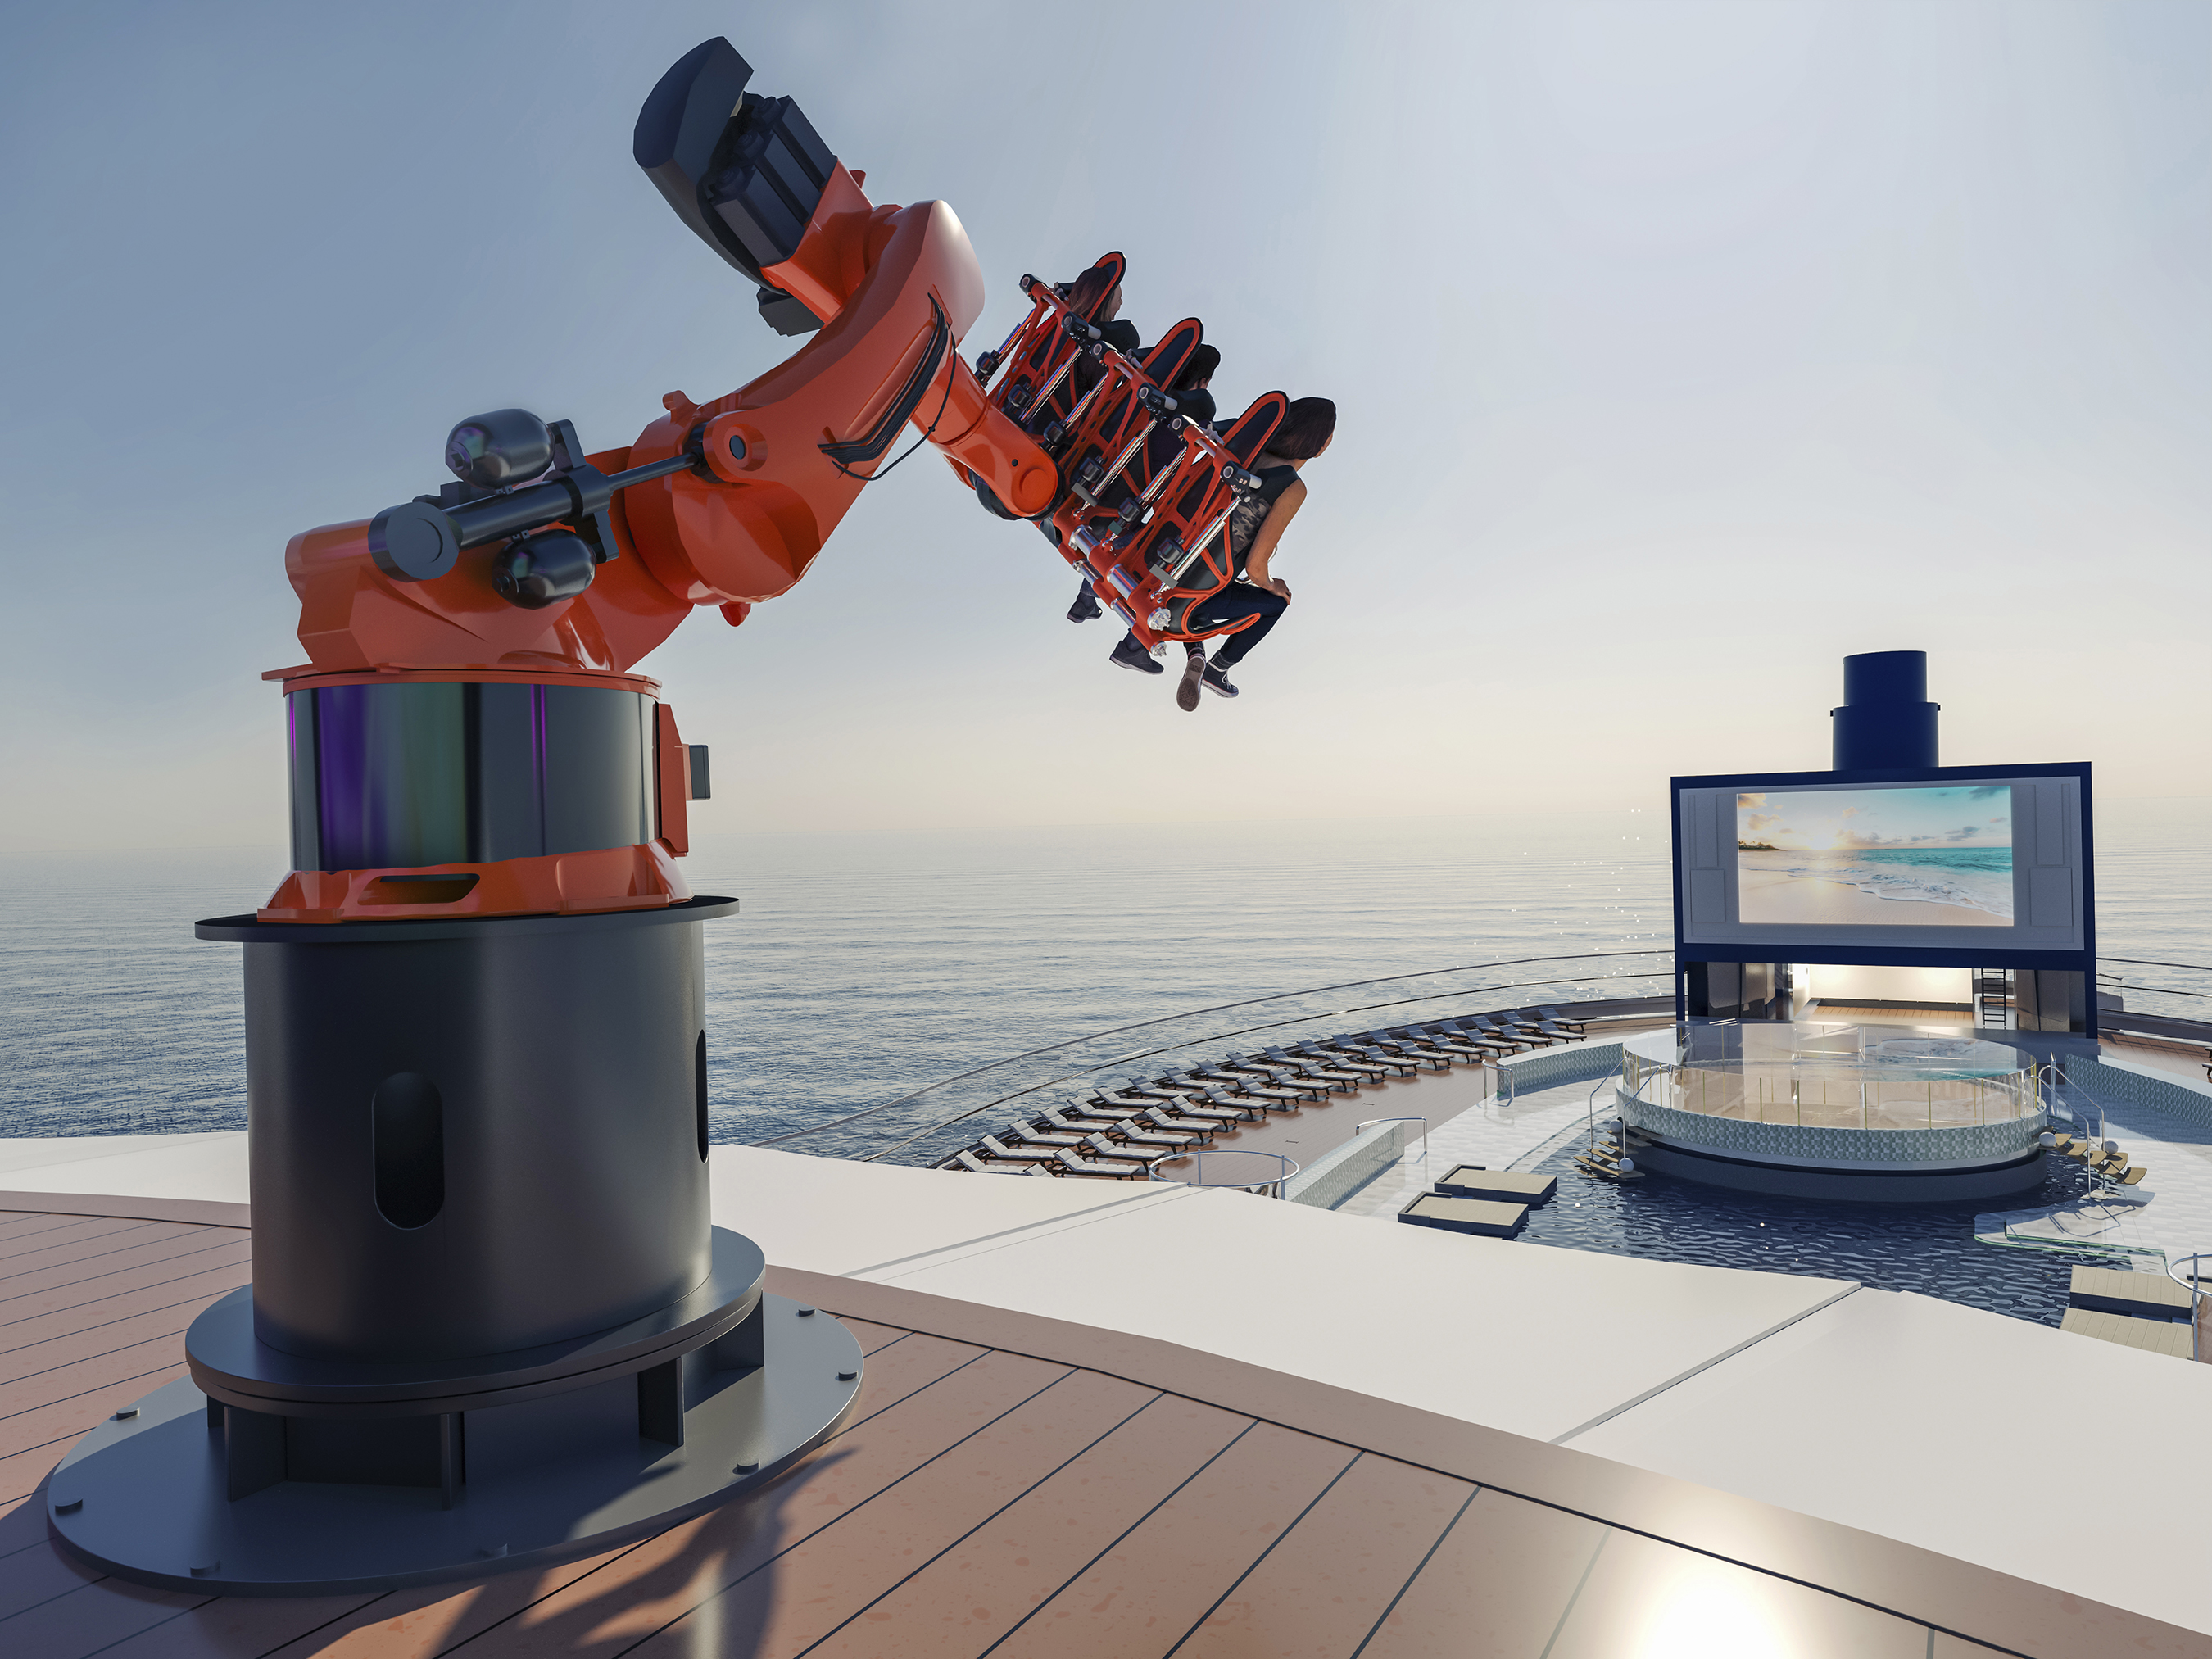 MSC Cruises' ROBOTRON will be the first robotic arm ride at sea.